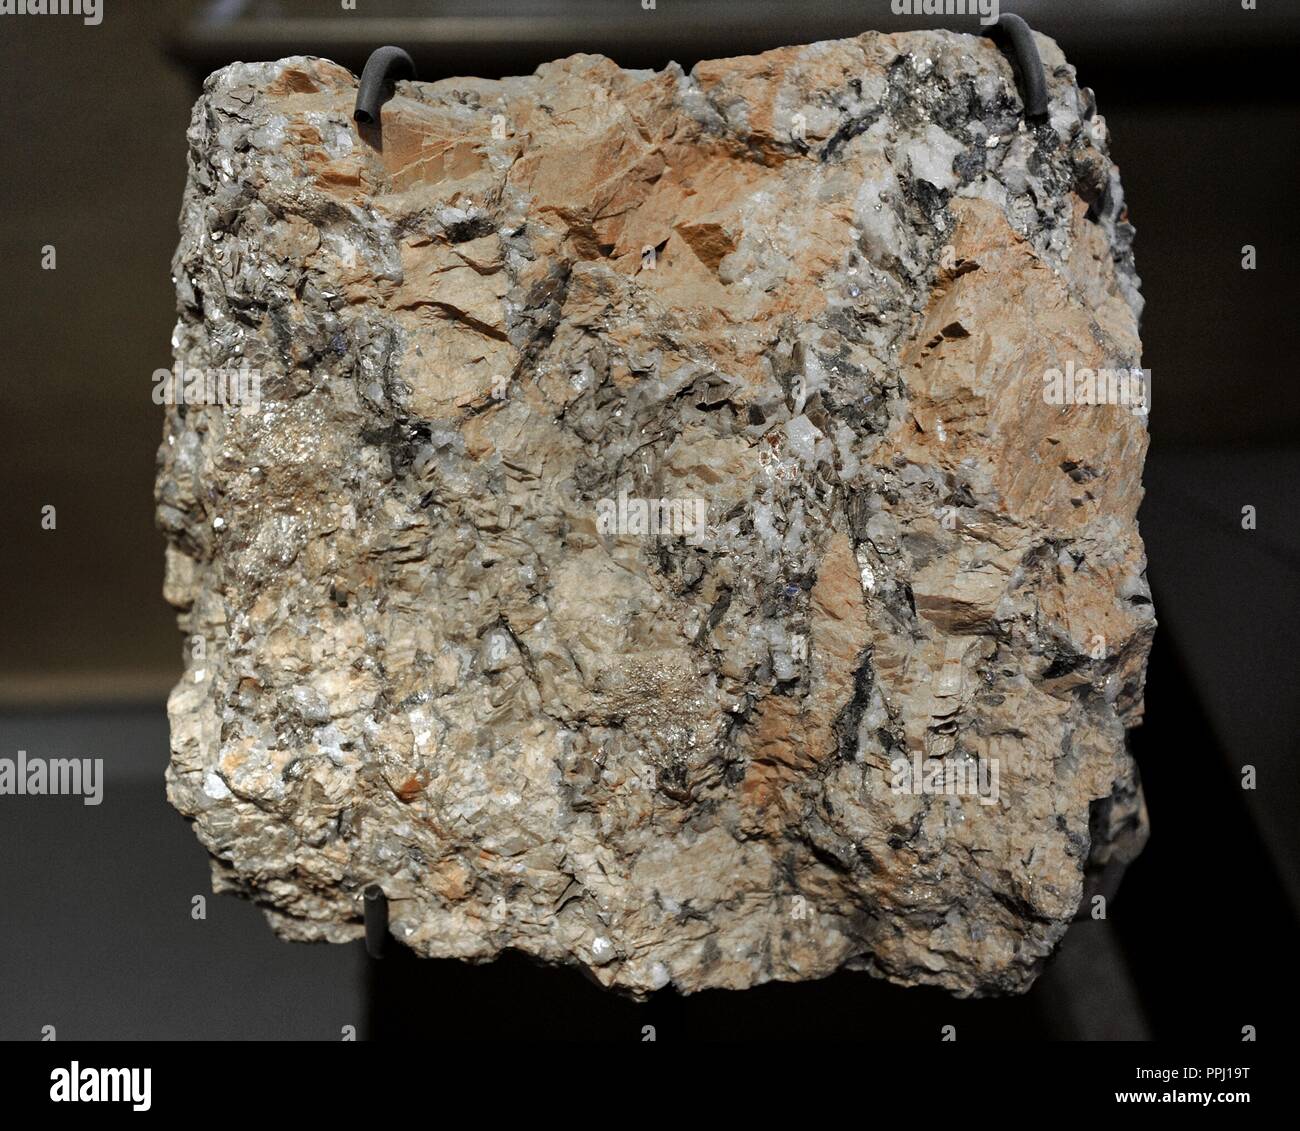 Pegmatite. Igneous rock with a grain size around 20 mm. Rocks with this grain size are said to have pegmatitic texture. Piece from Germany. Museum fur Naturkunde. Berlin. Germany. Europe. Stock Photo